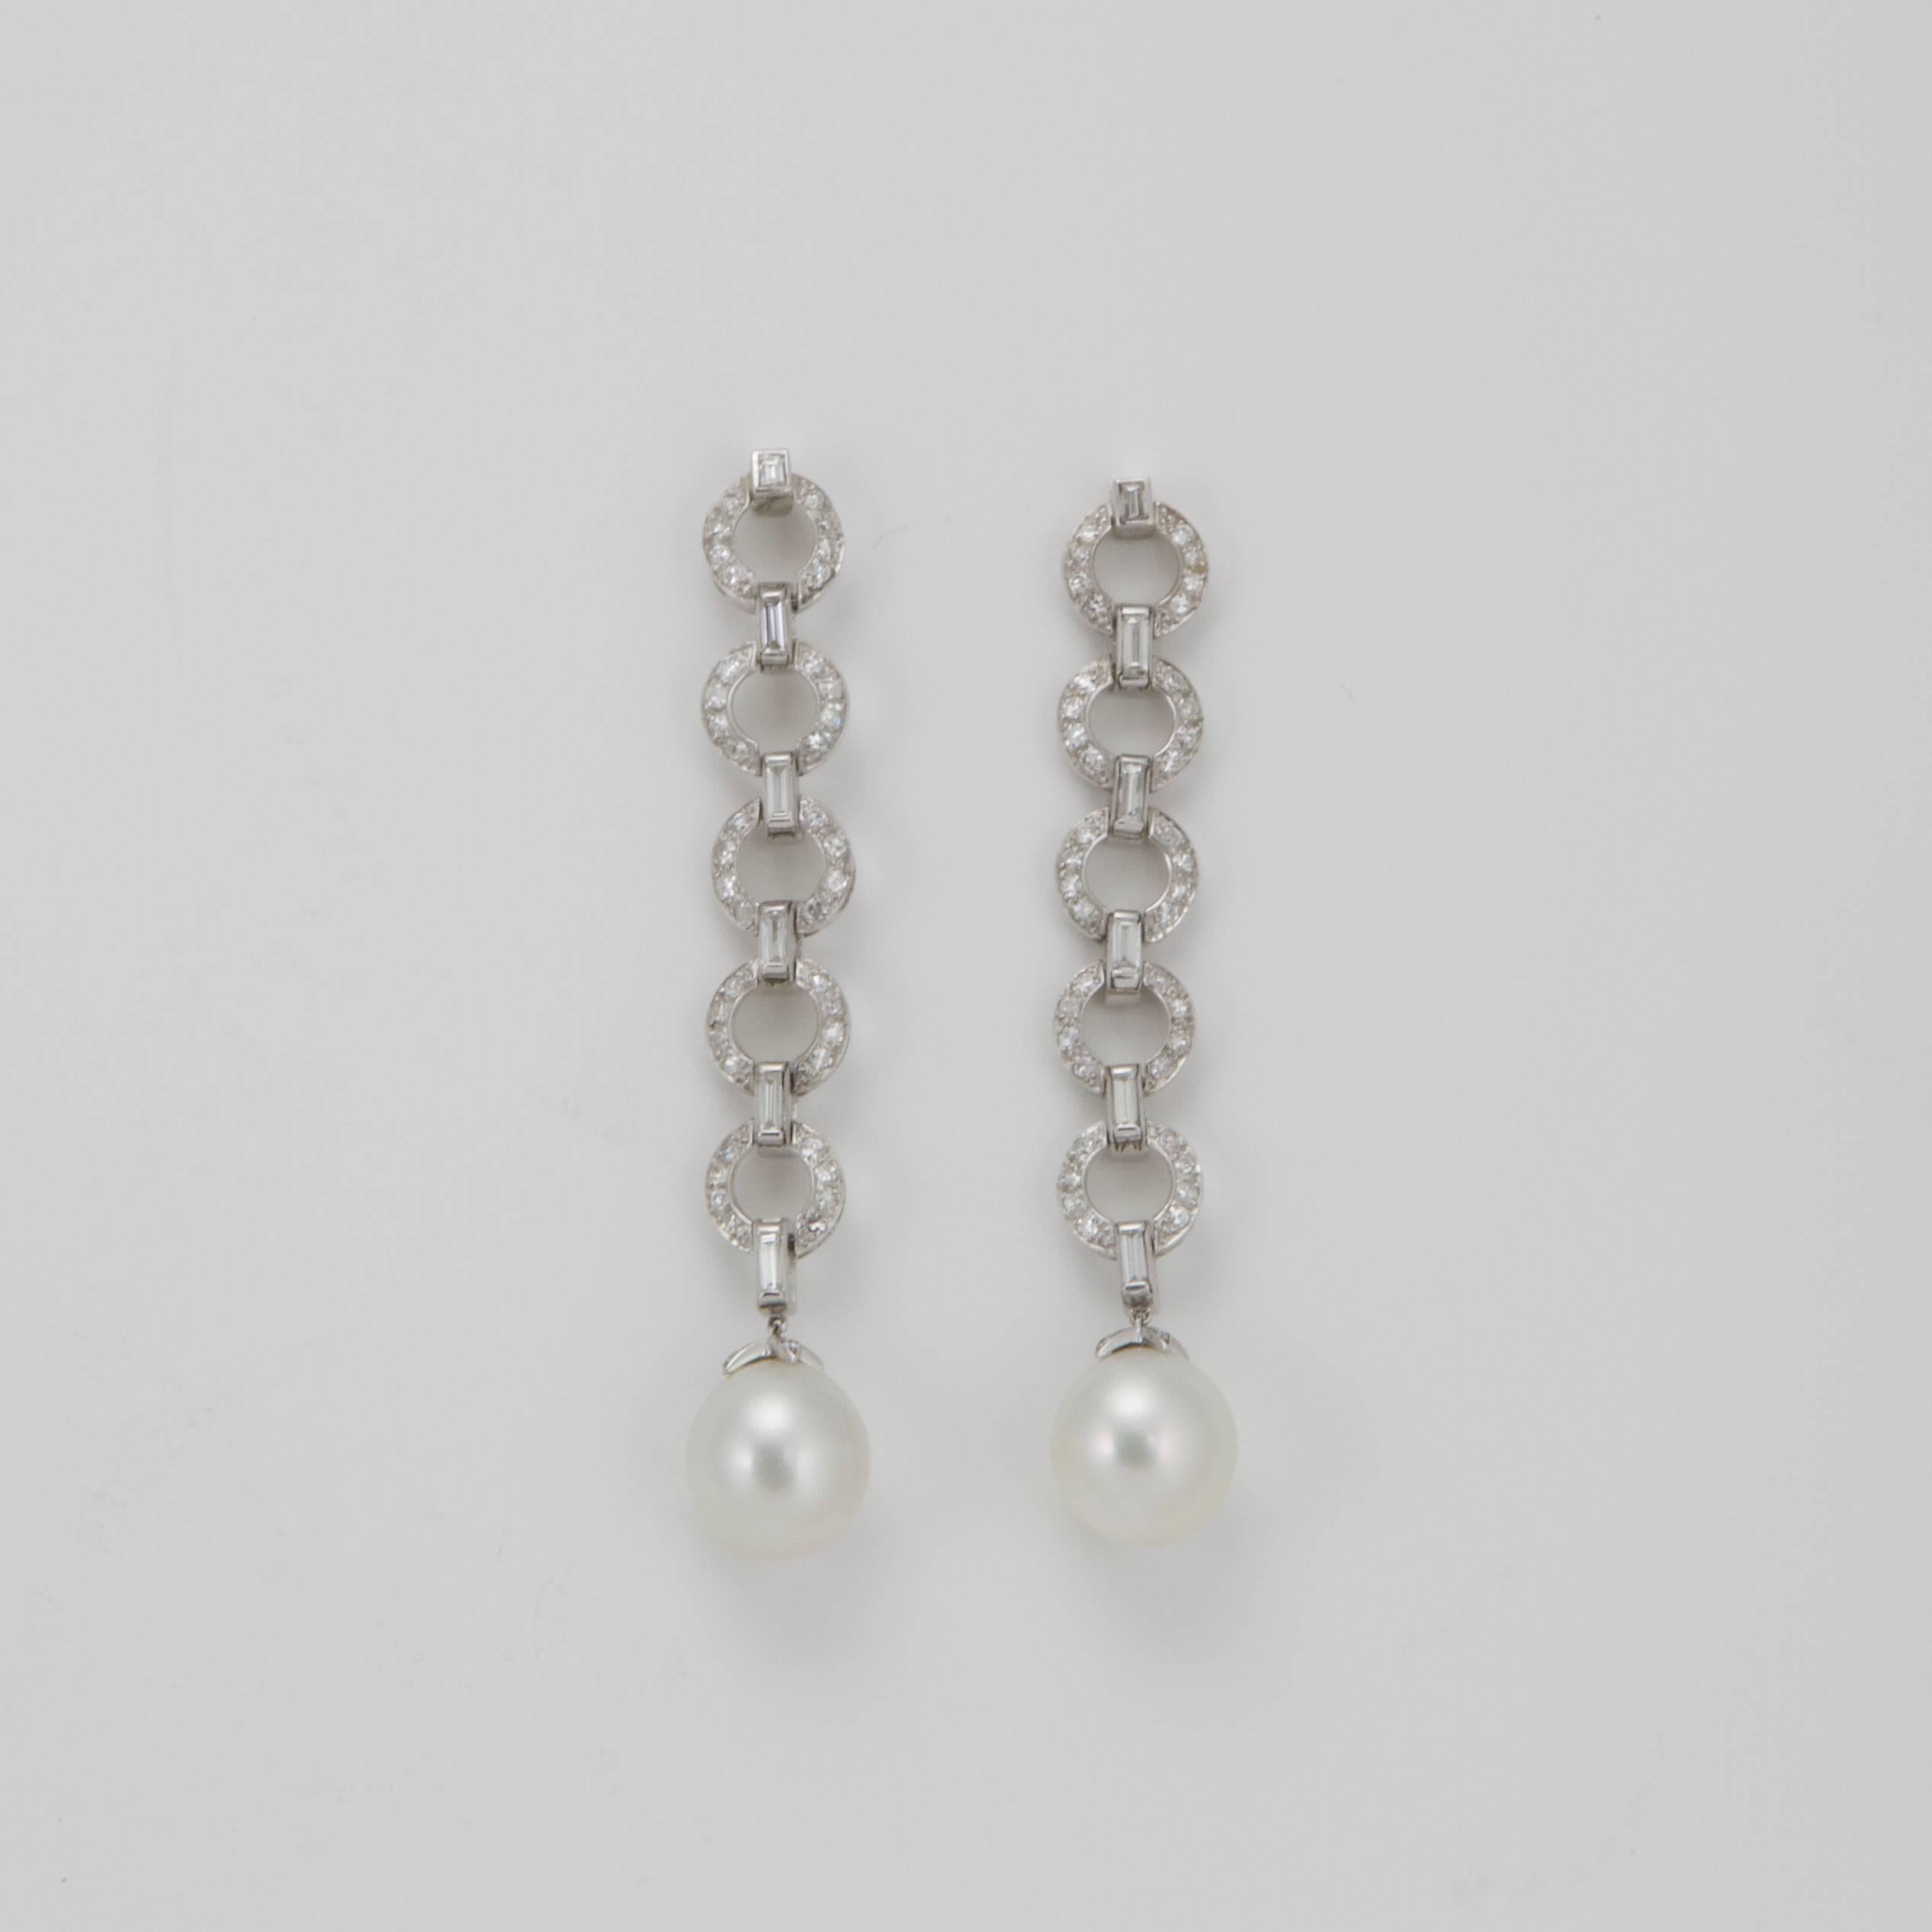 Each composed with five circles set with round diamonds retained by six baguette diamond suspending a cultured pearl.
Total weight diamond almost 3.2 carats. 
Size of CULTURED PEARL approximatly 13.6 x 14.5 mm and 13.9 x 14 mm. 
Made in France